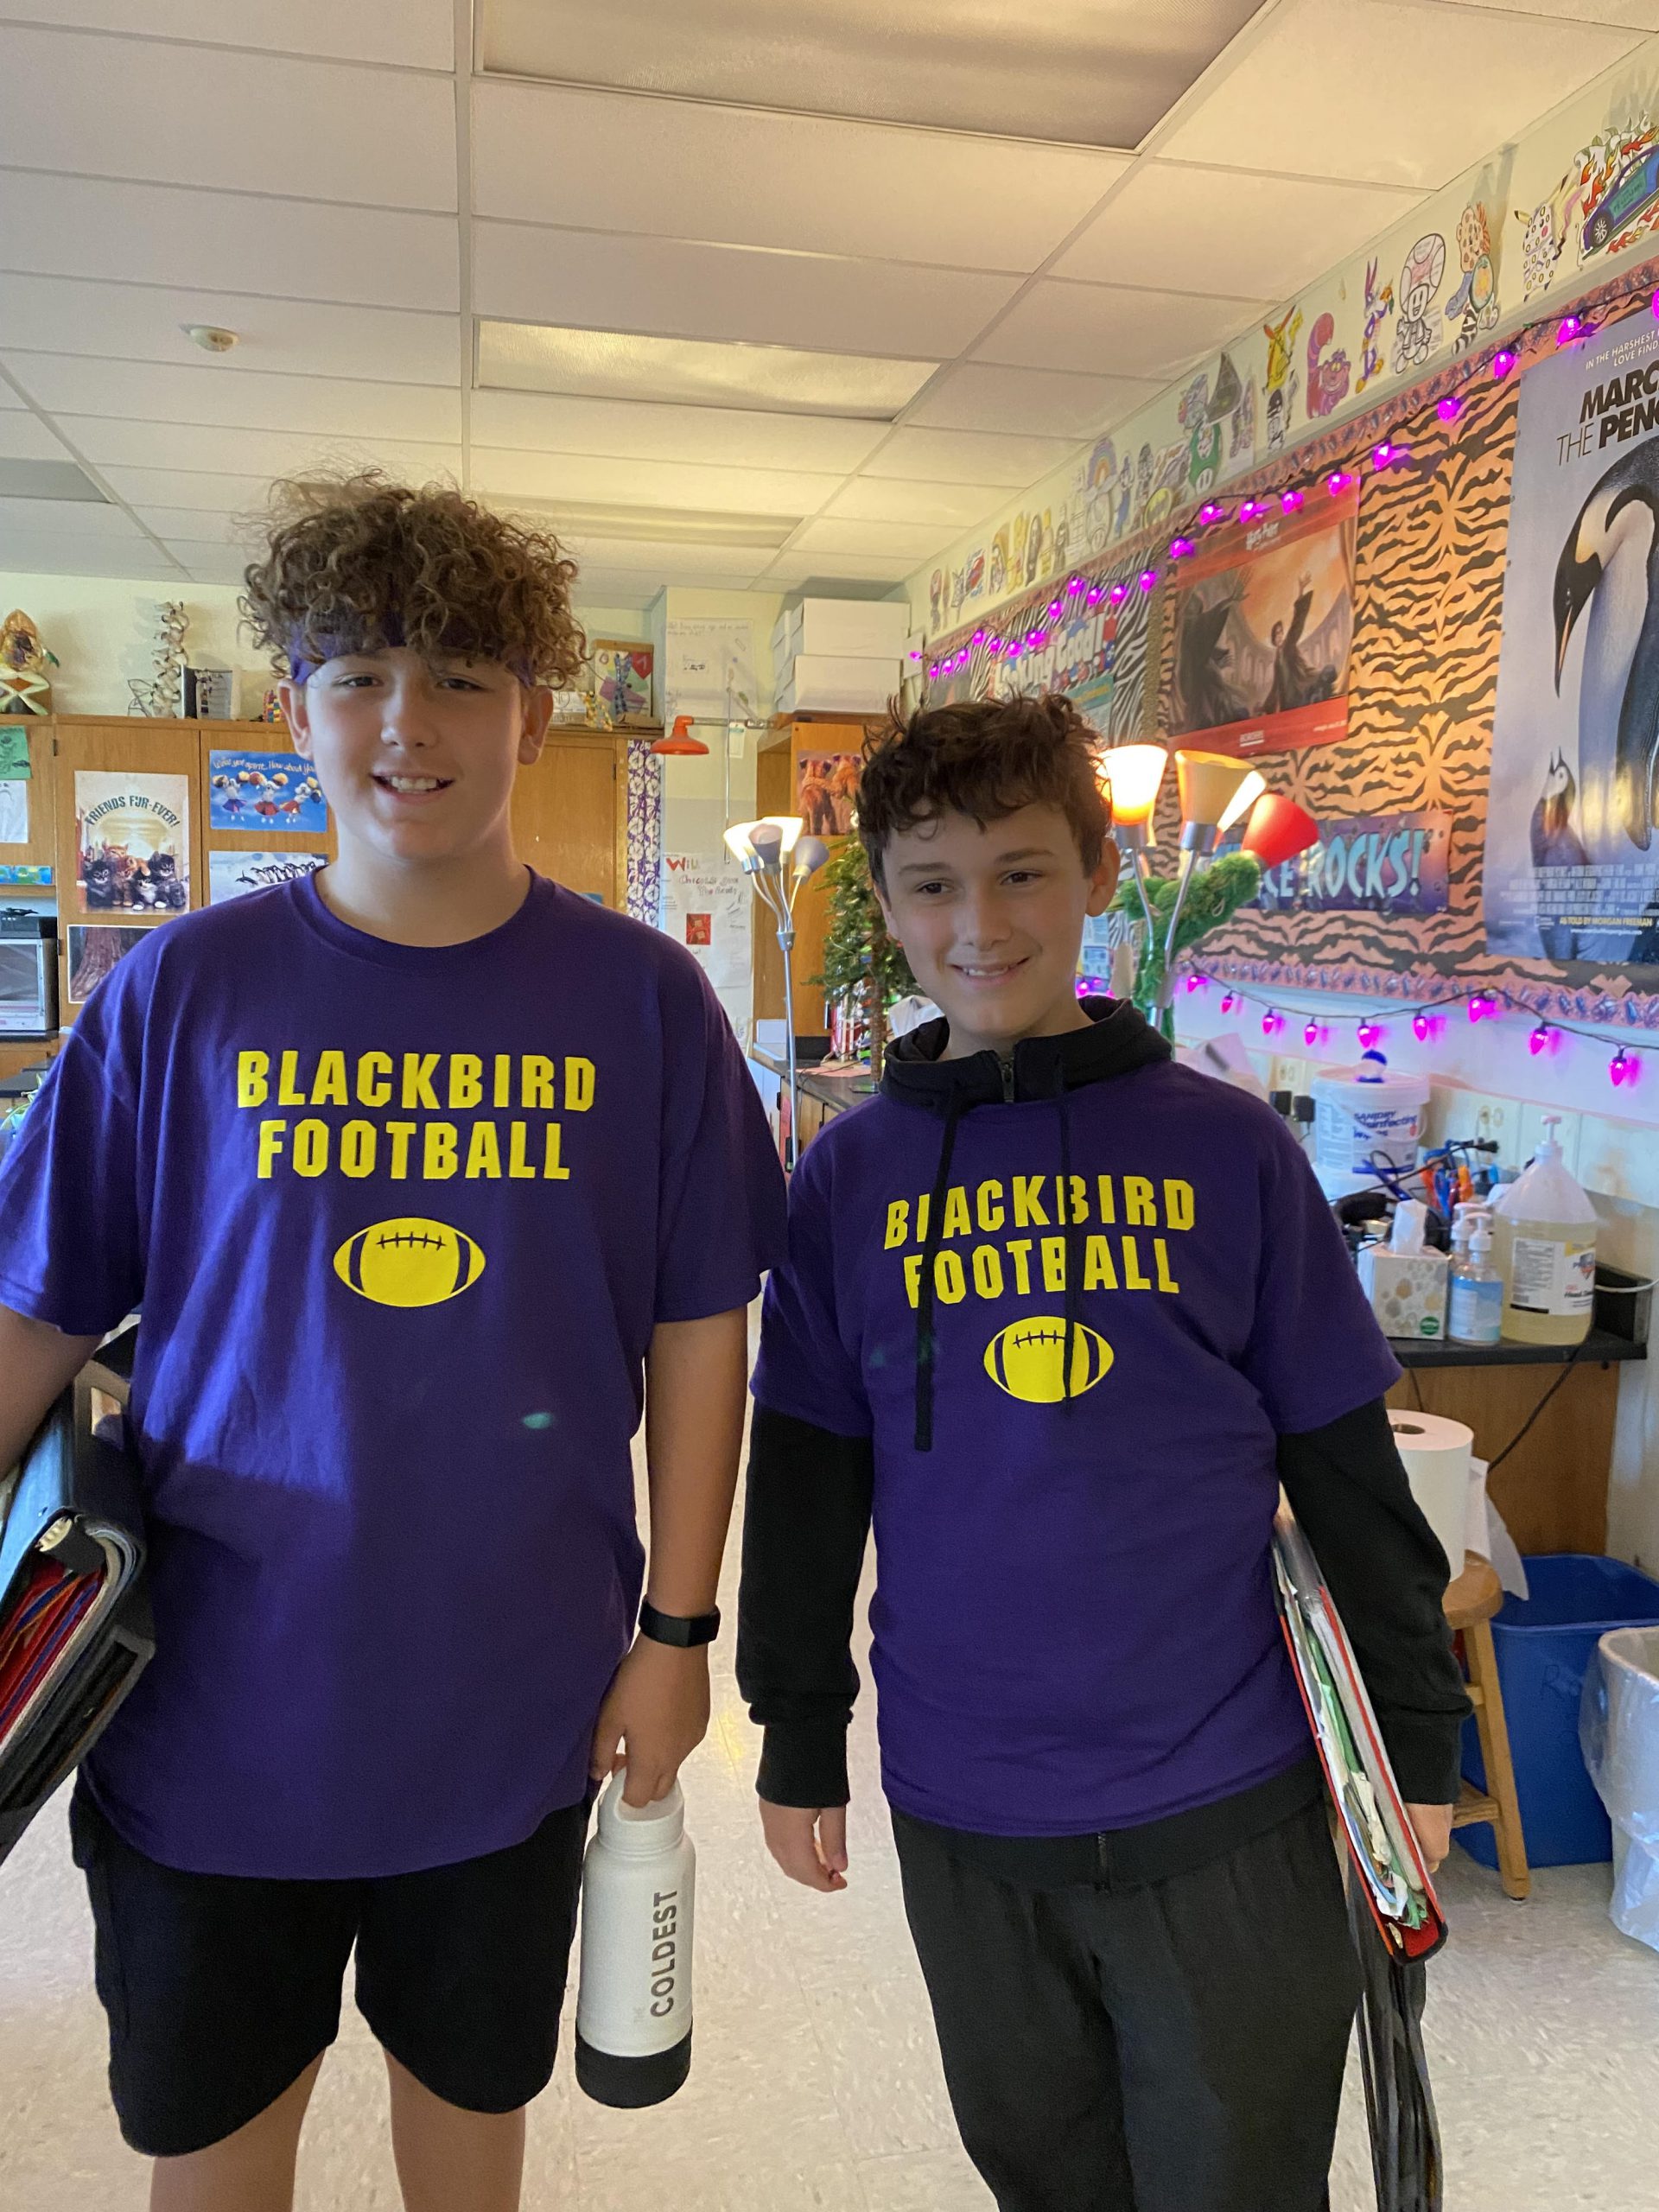 A photo of two middle schoolers in Blackbird Football shirts